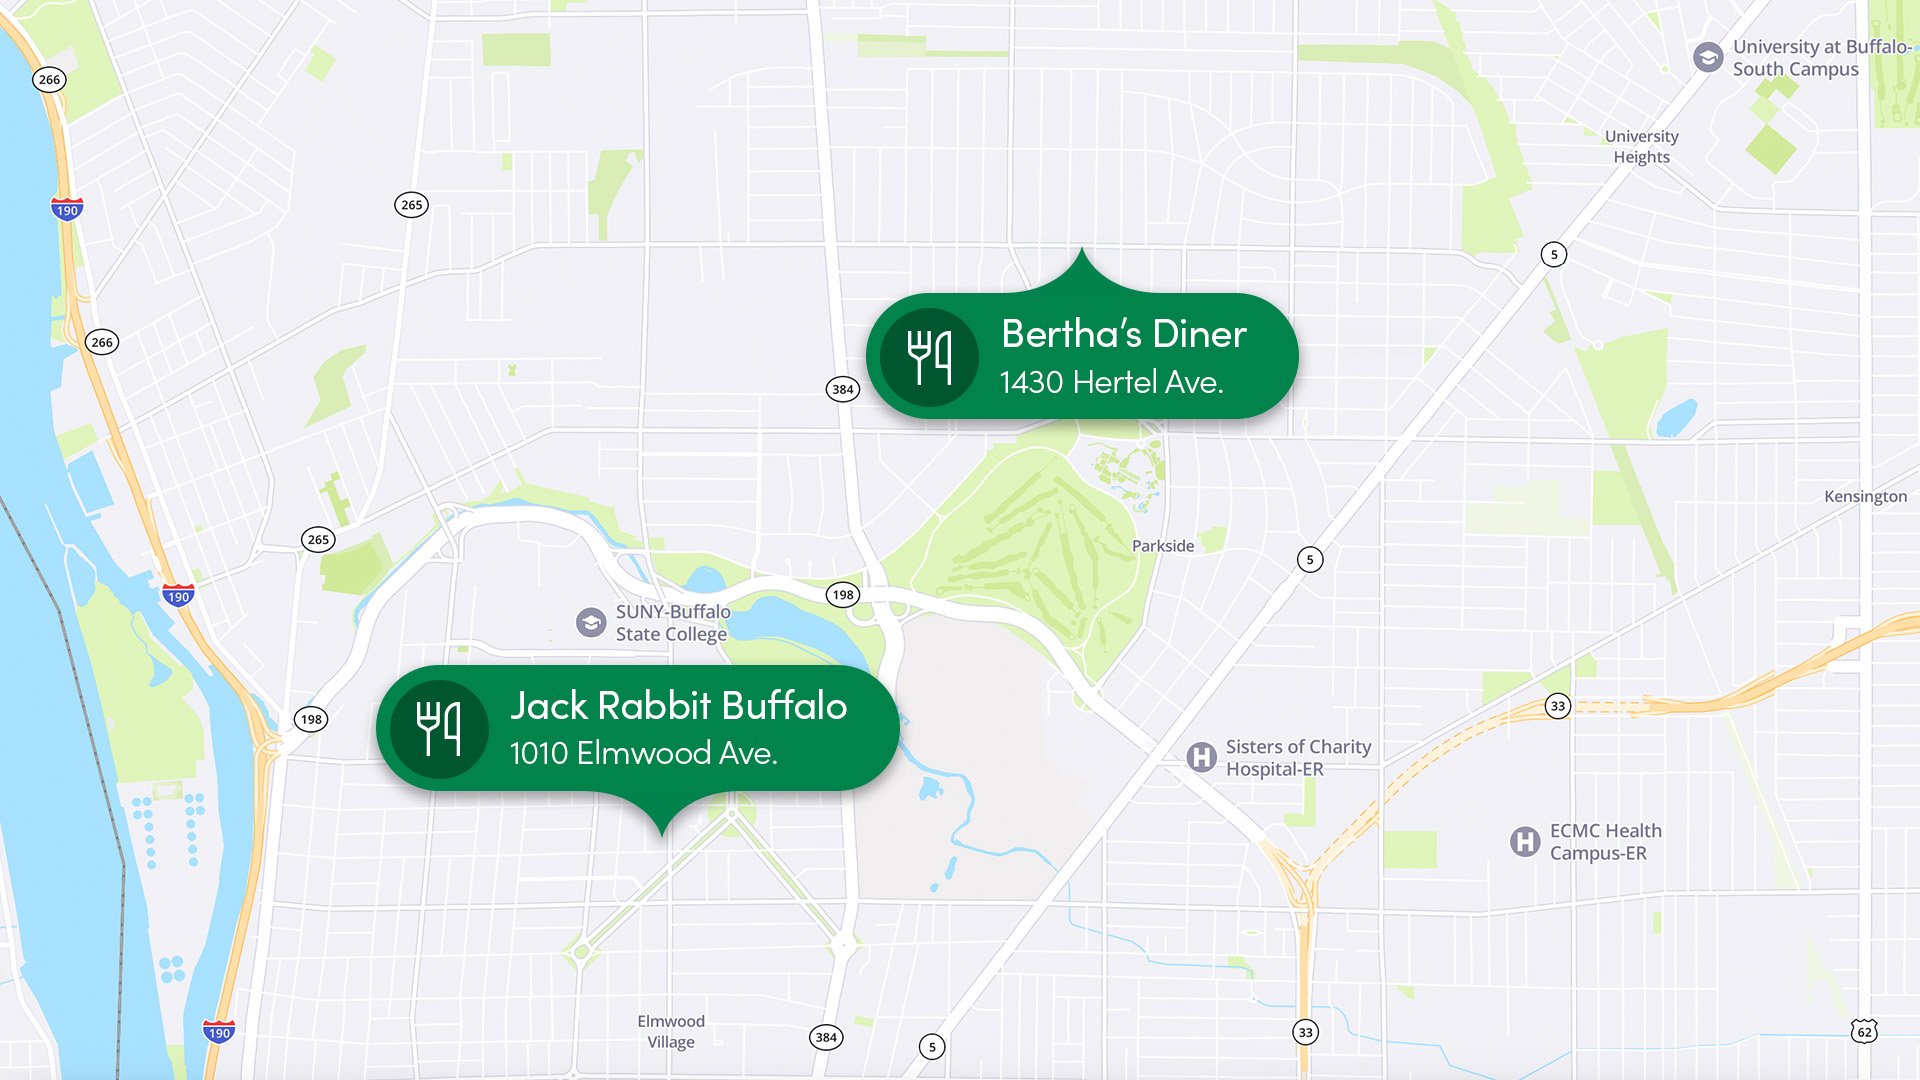 map showing food destinations in Buffalo, NY